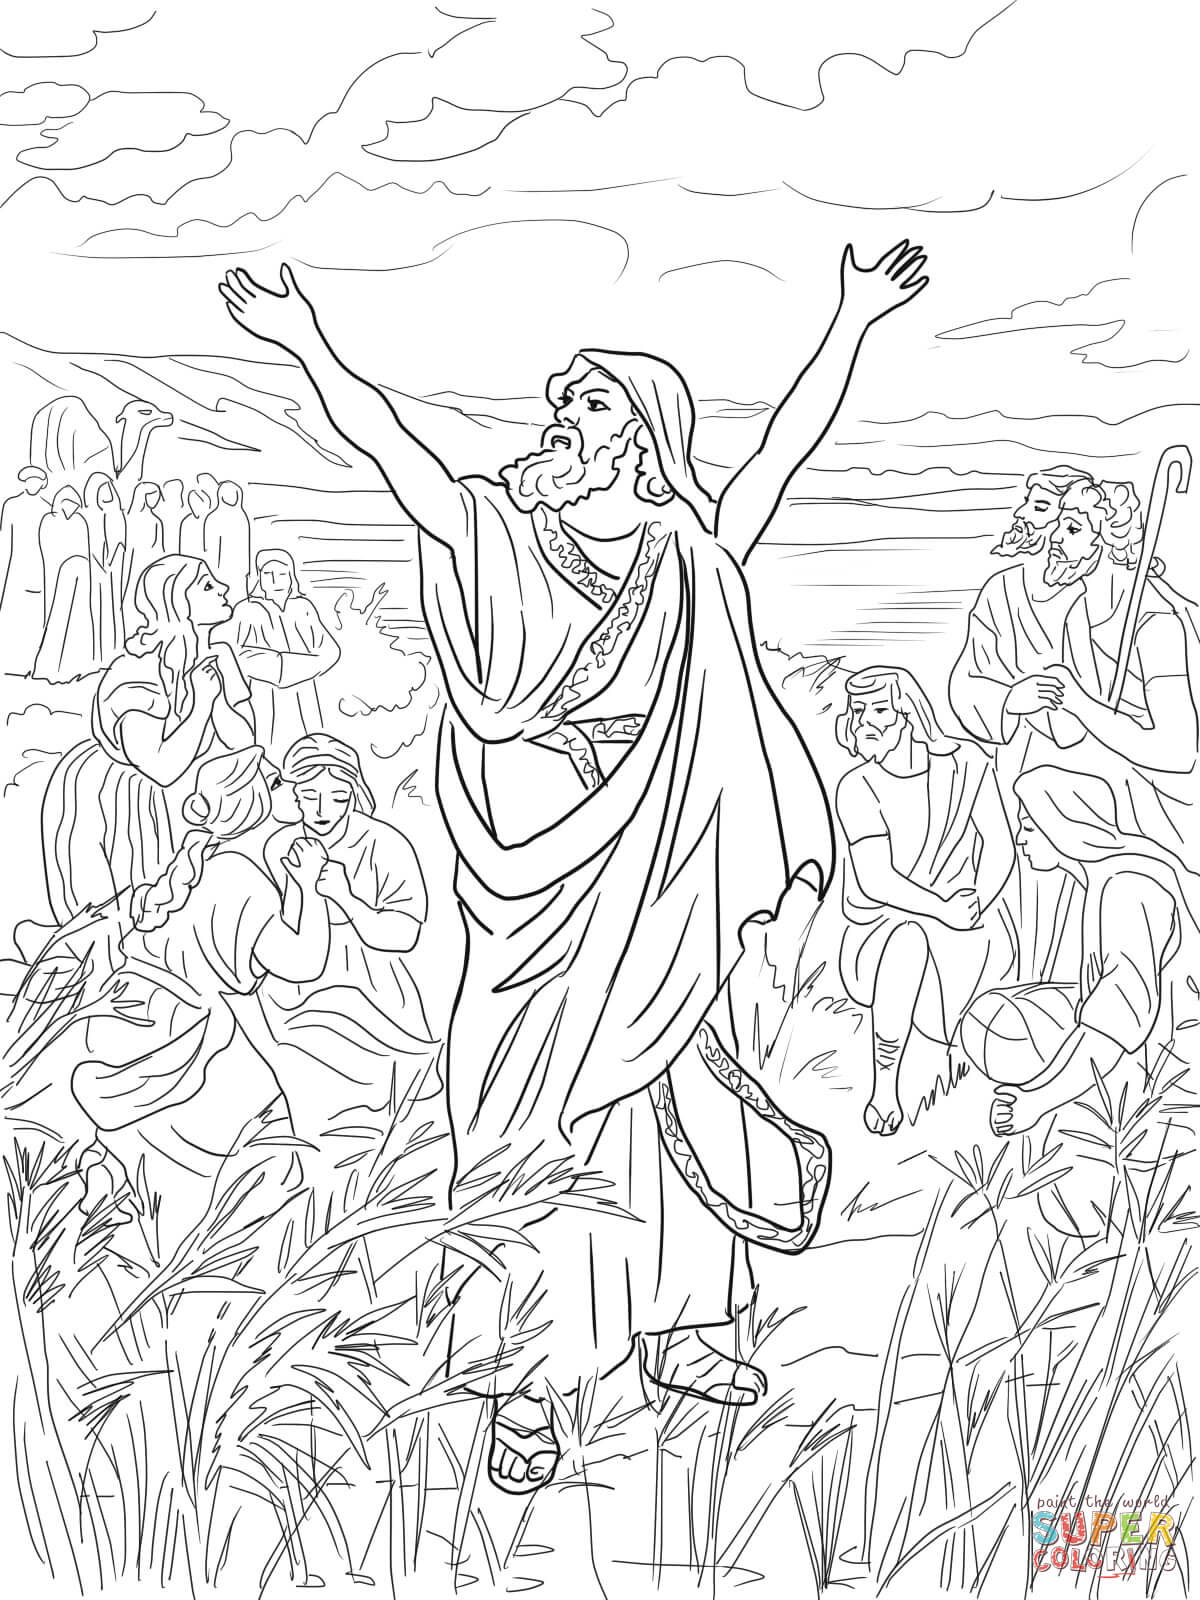 Coloring Page Priest Behind Lectern Catholic Kids Cat - vrogue.co